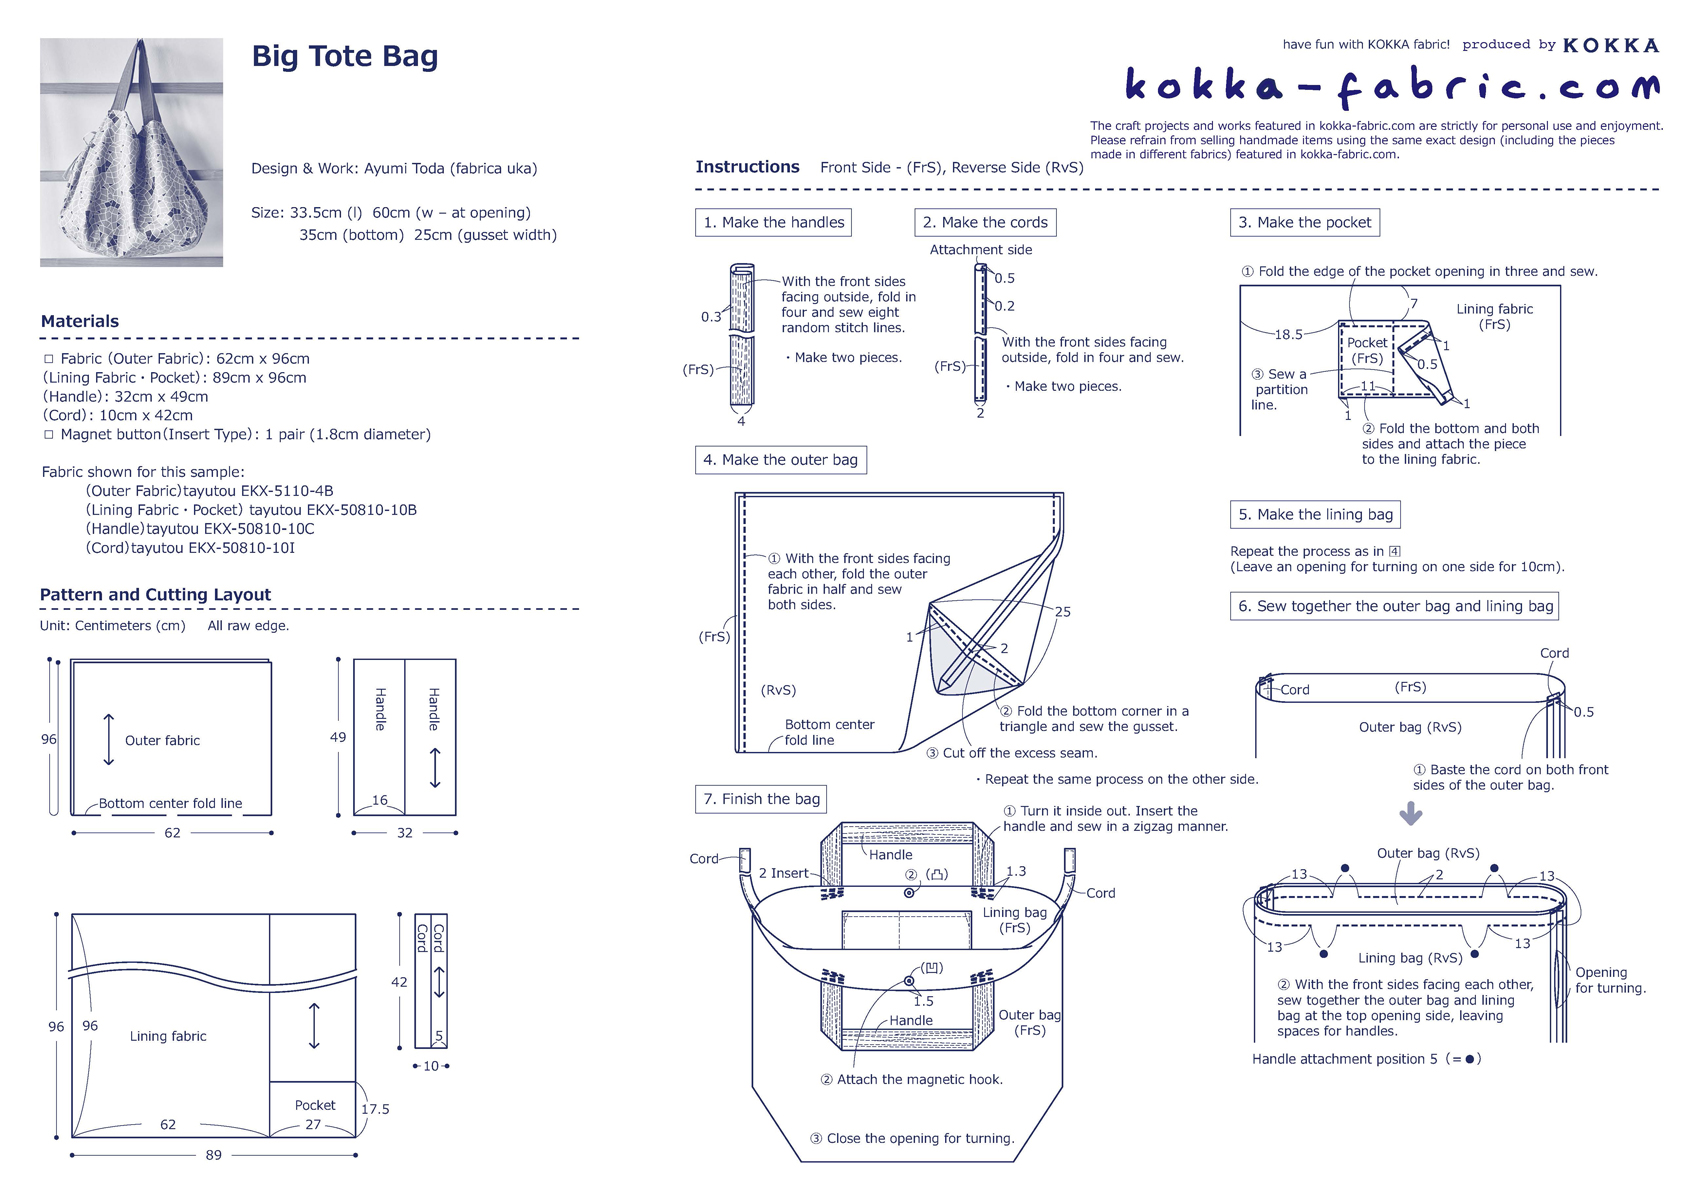 Big Tote with Ample Gusset – Sewing Instructions | KOKKA-FABRIC.COM ...